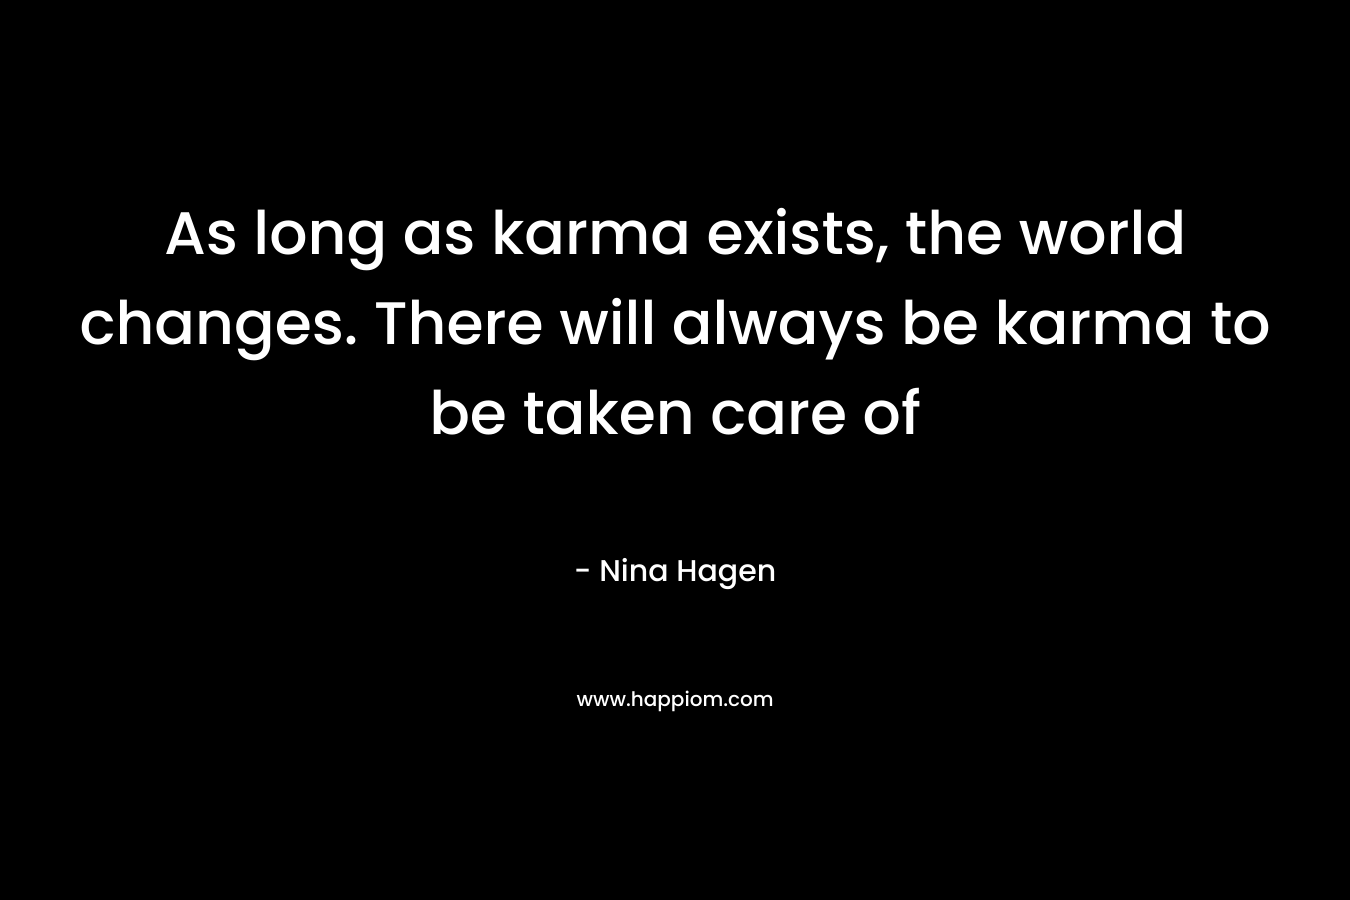 As long as karma exists, the world changes. There will always be karma to be taken care of